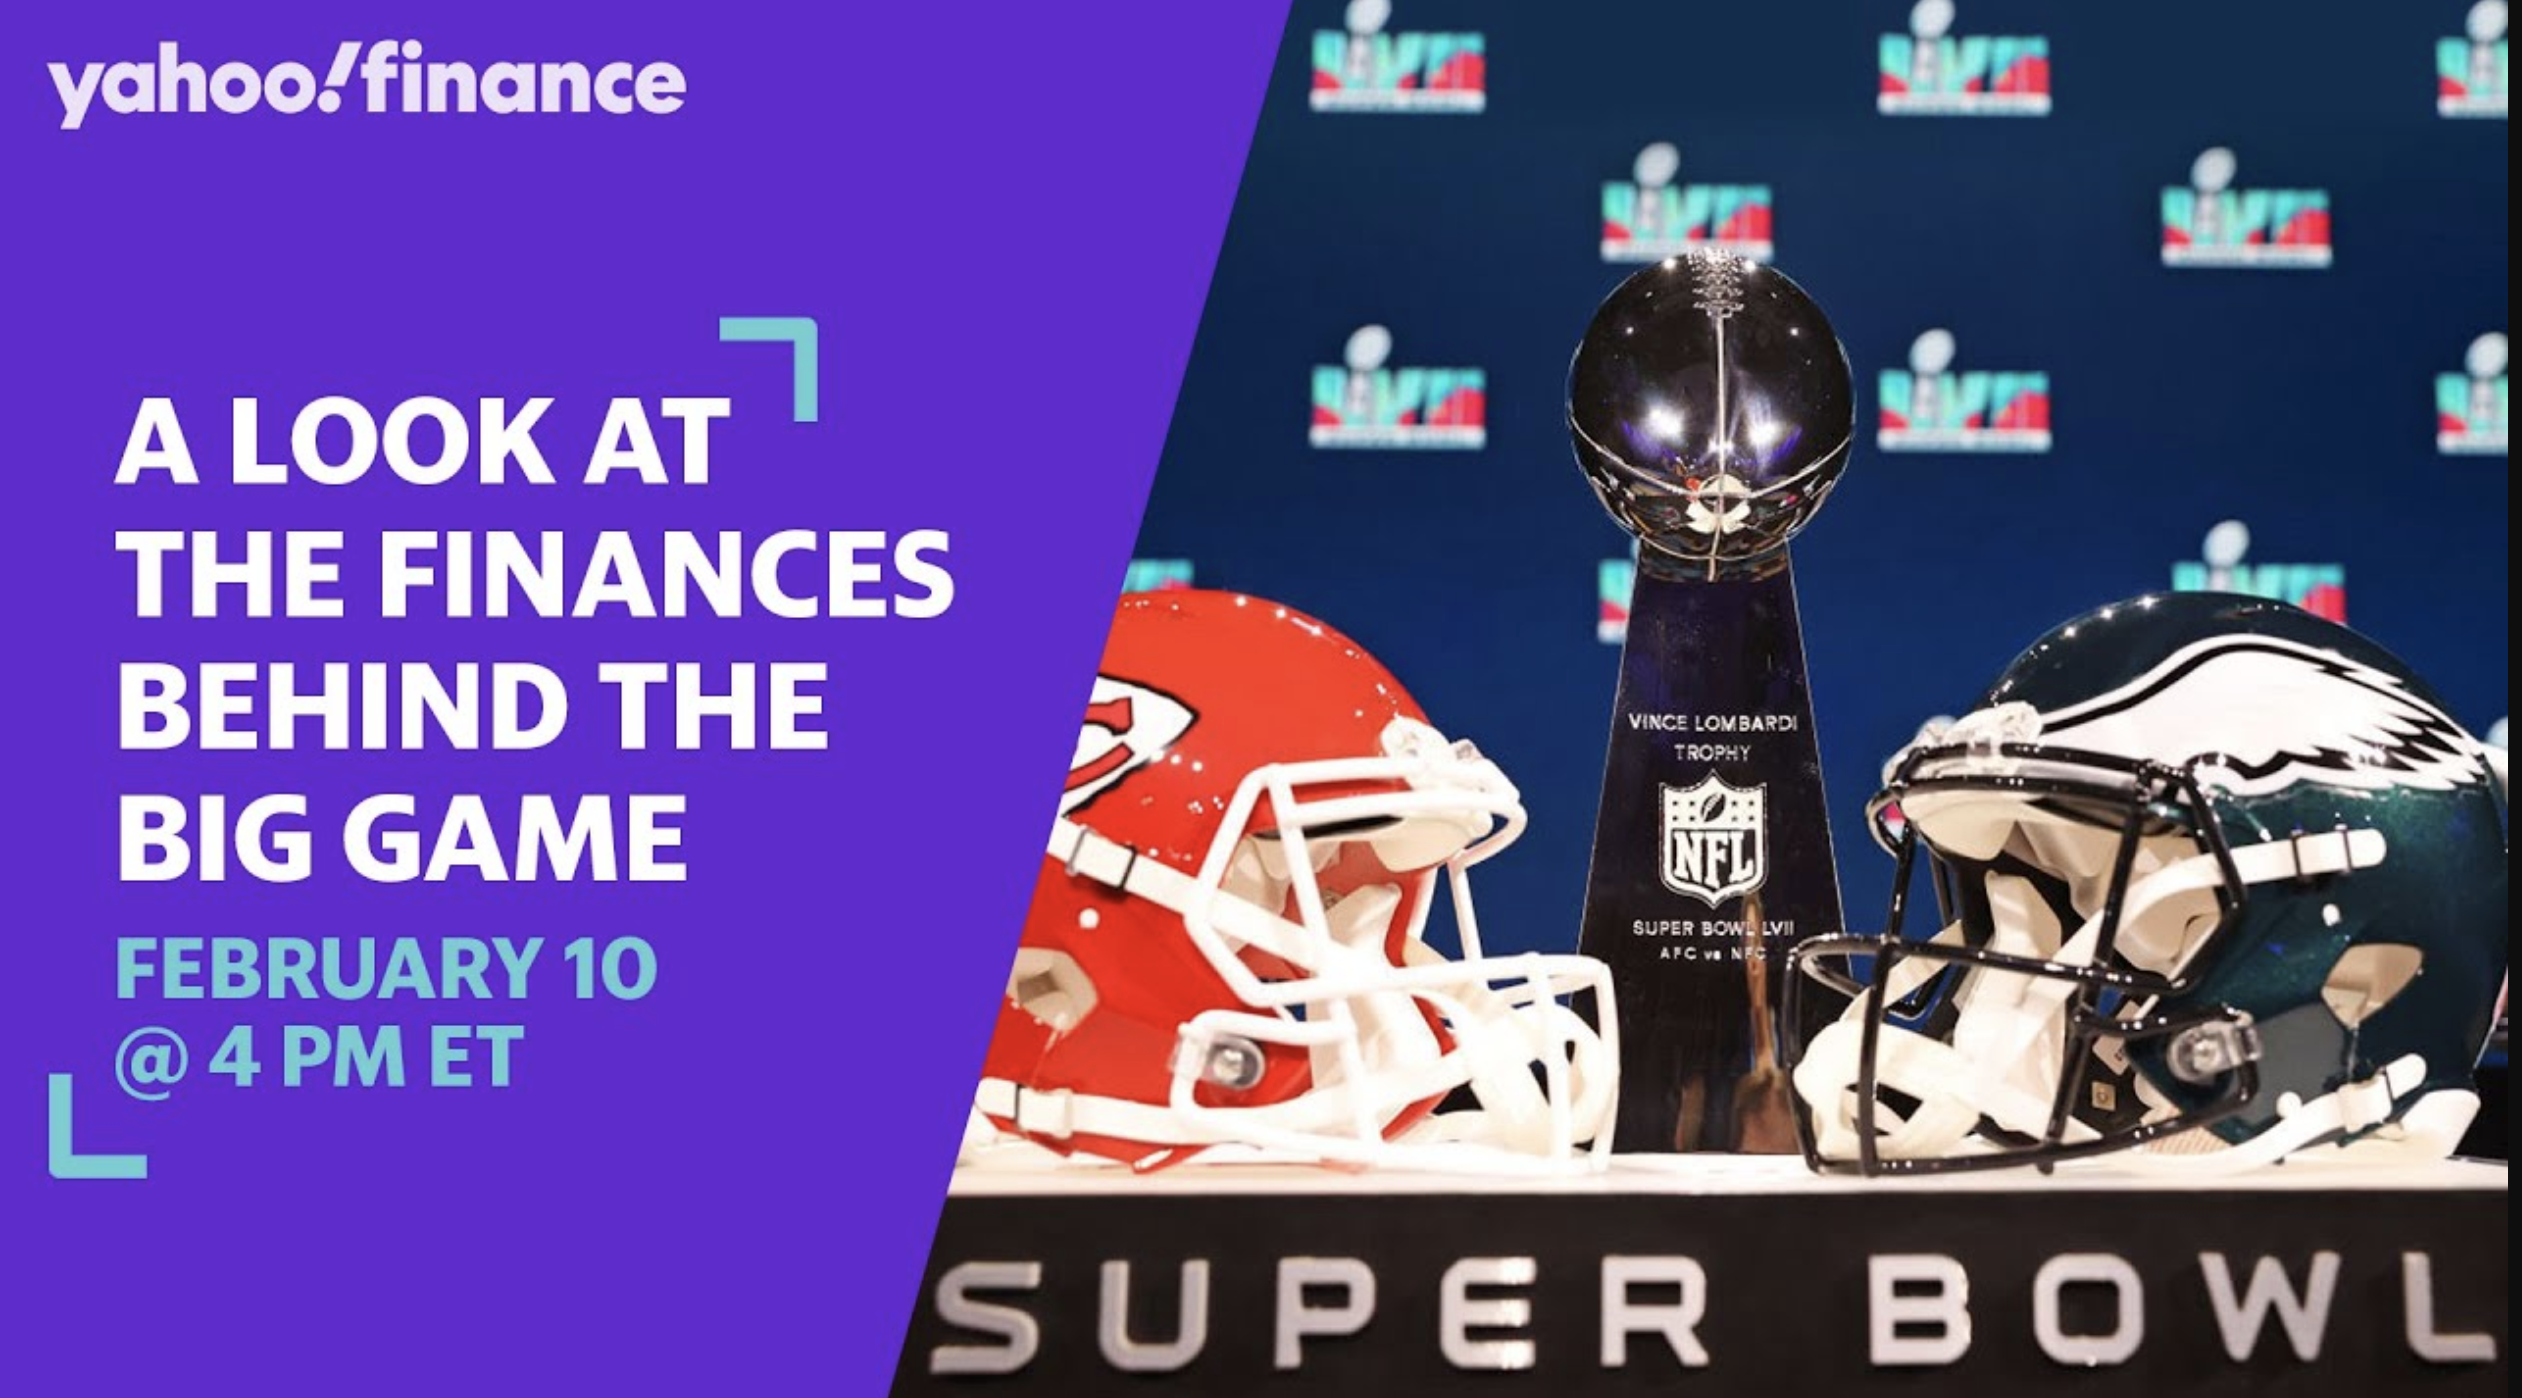 Covers.com and Caesars Sportsbook Team Up Ahead of Super Bowl LVII